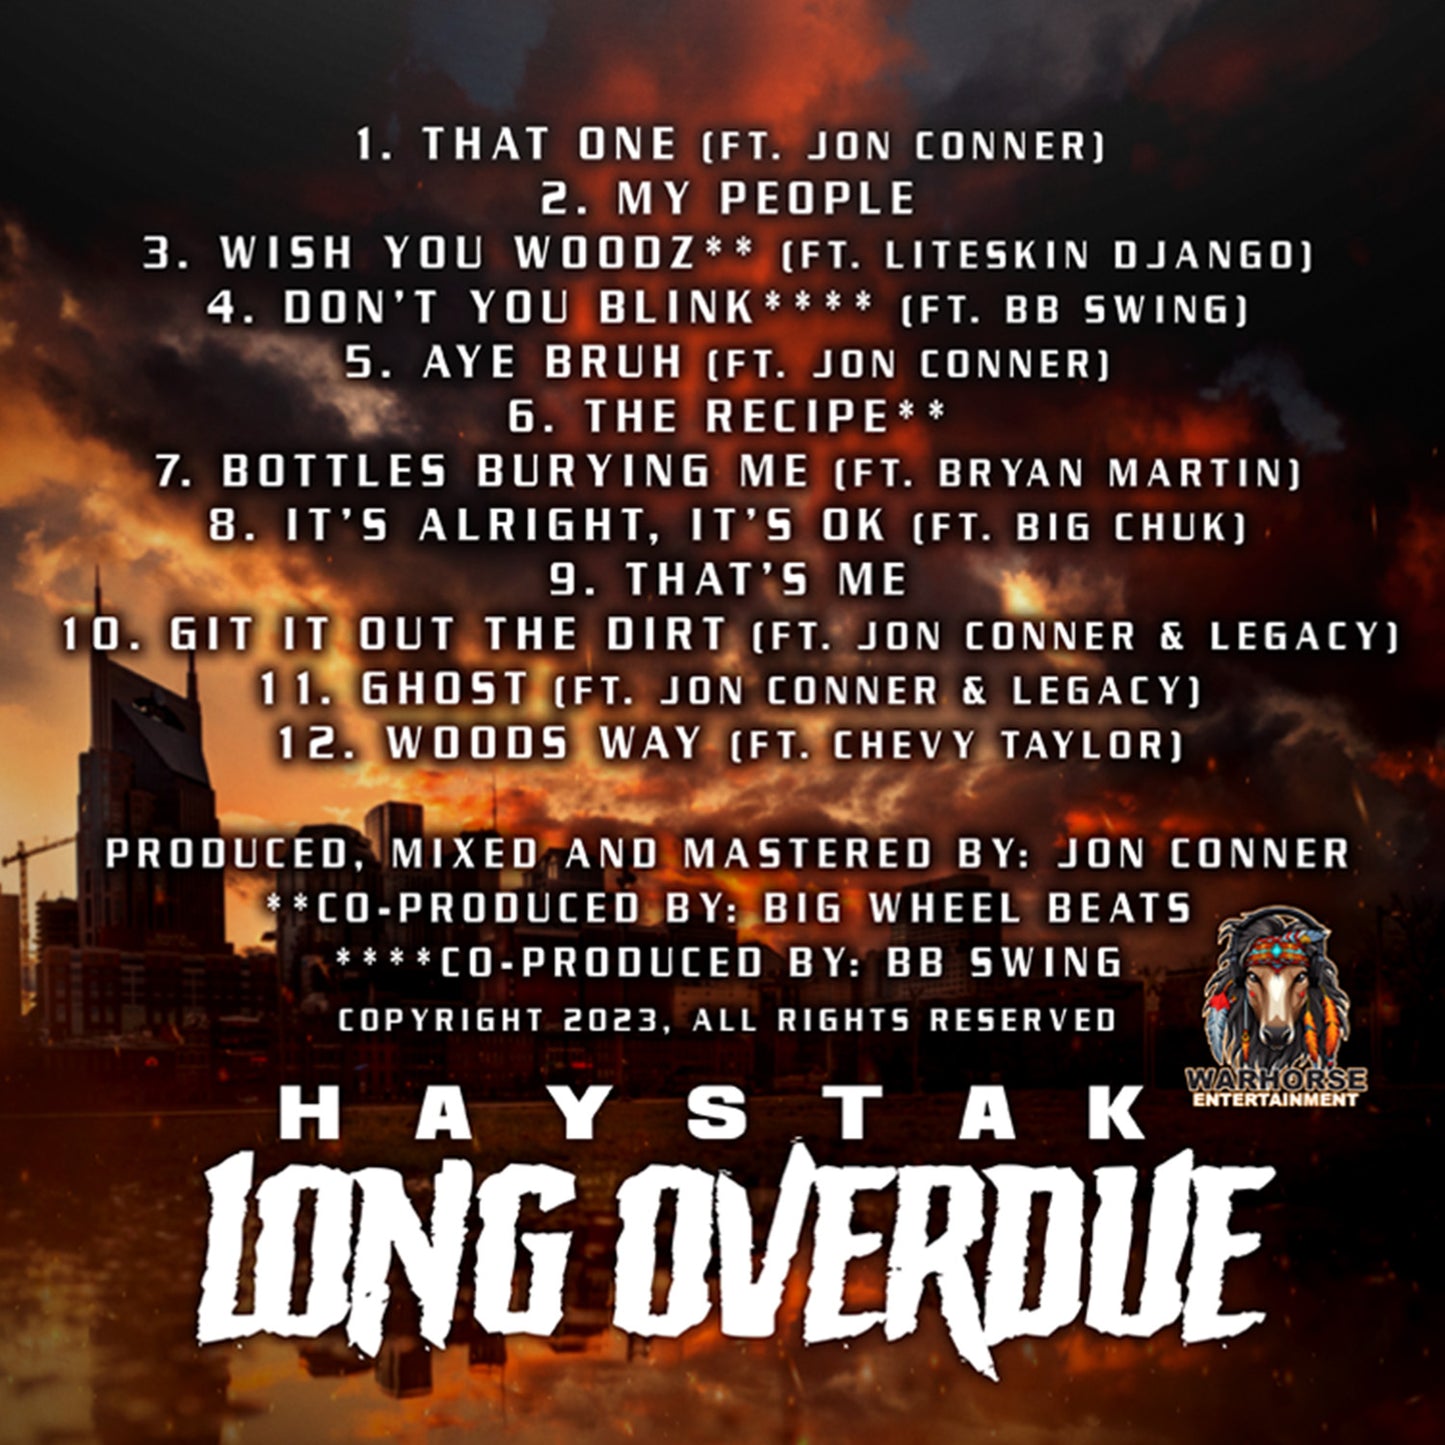 Haystak - "Long Overdue" (Limited Edition CD)